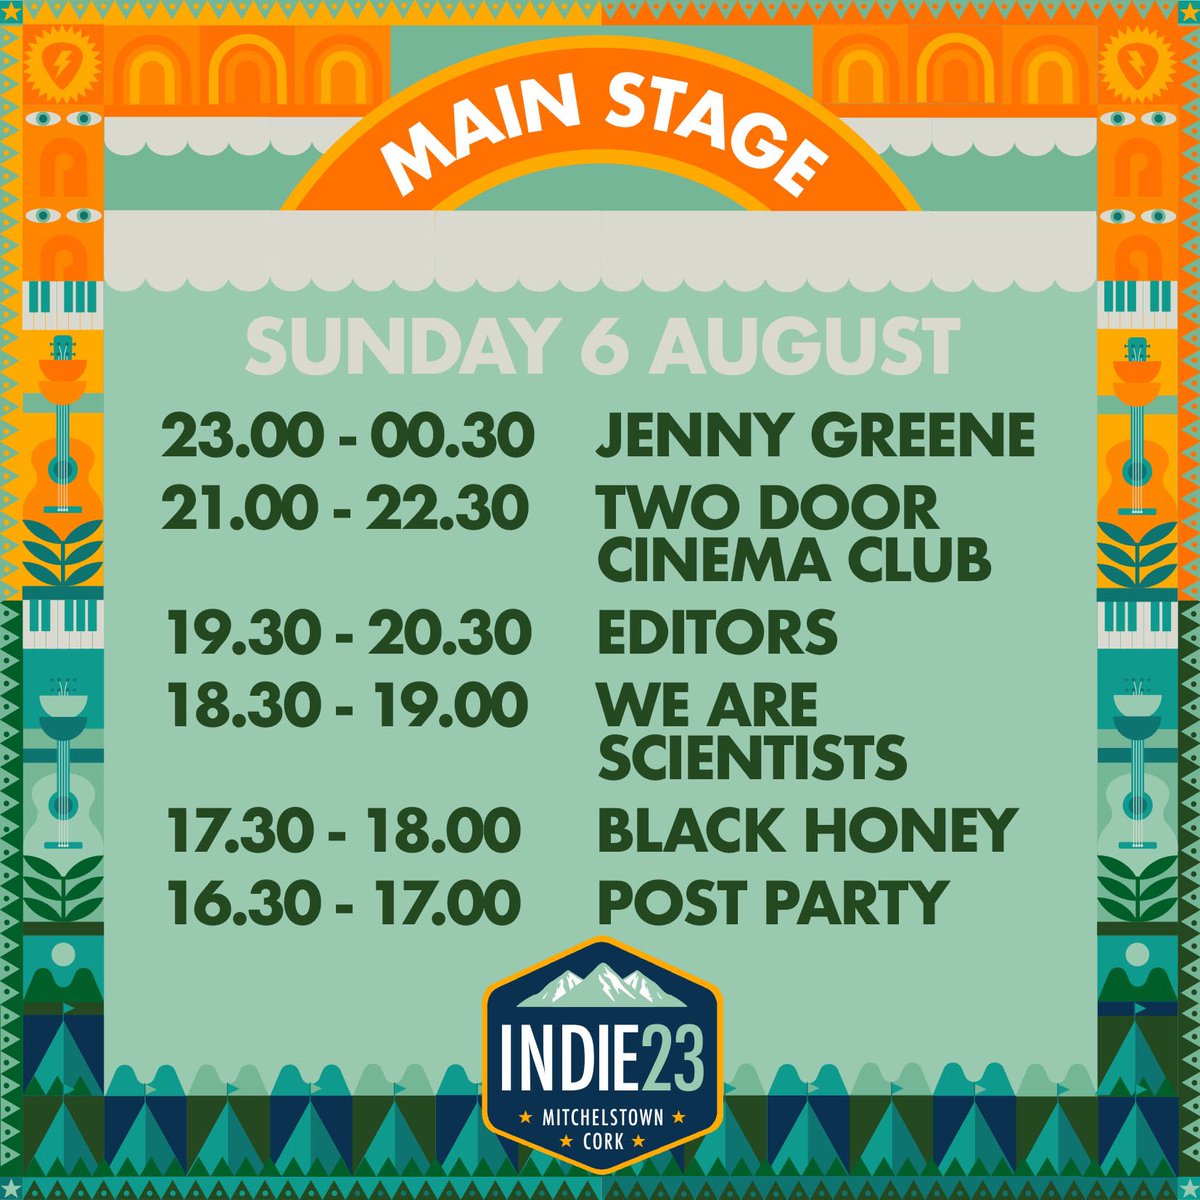 🎉CATCH US ON THE INDIEPENDENCE MAIN STAGE NEXT SUNDAY 🎉 #INDIE23